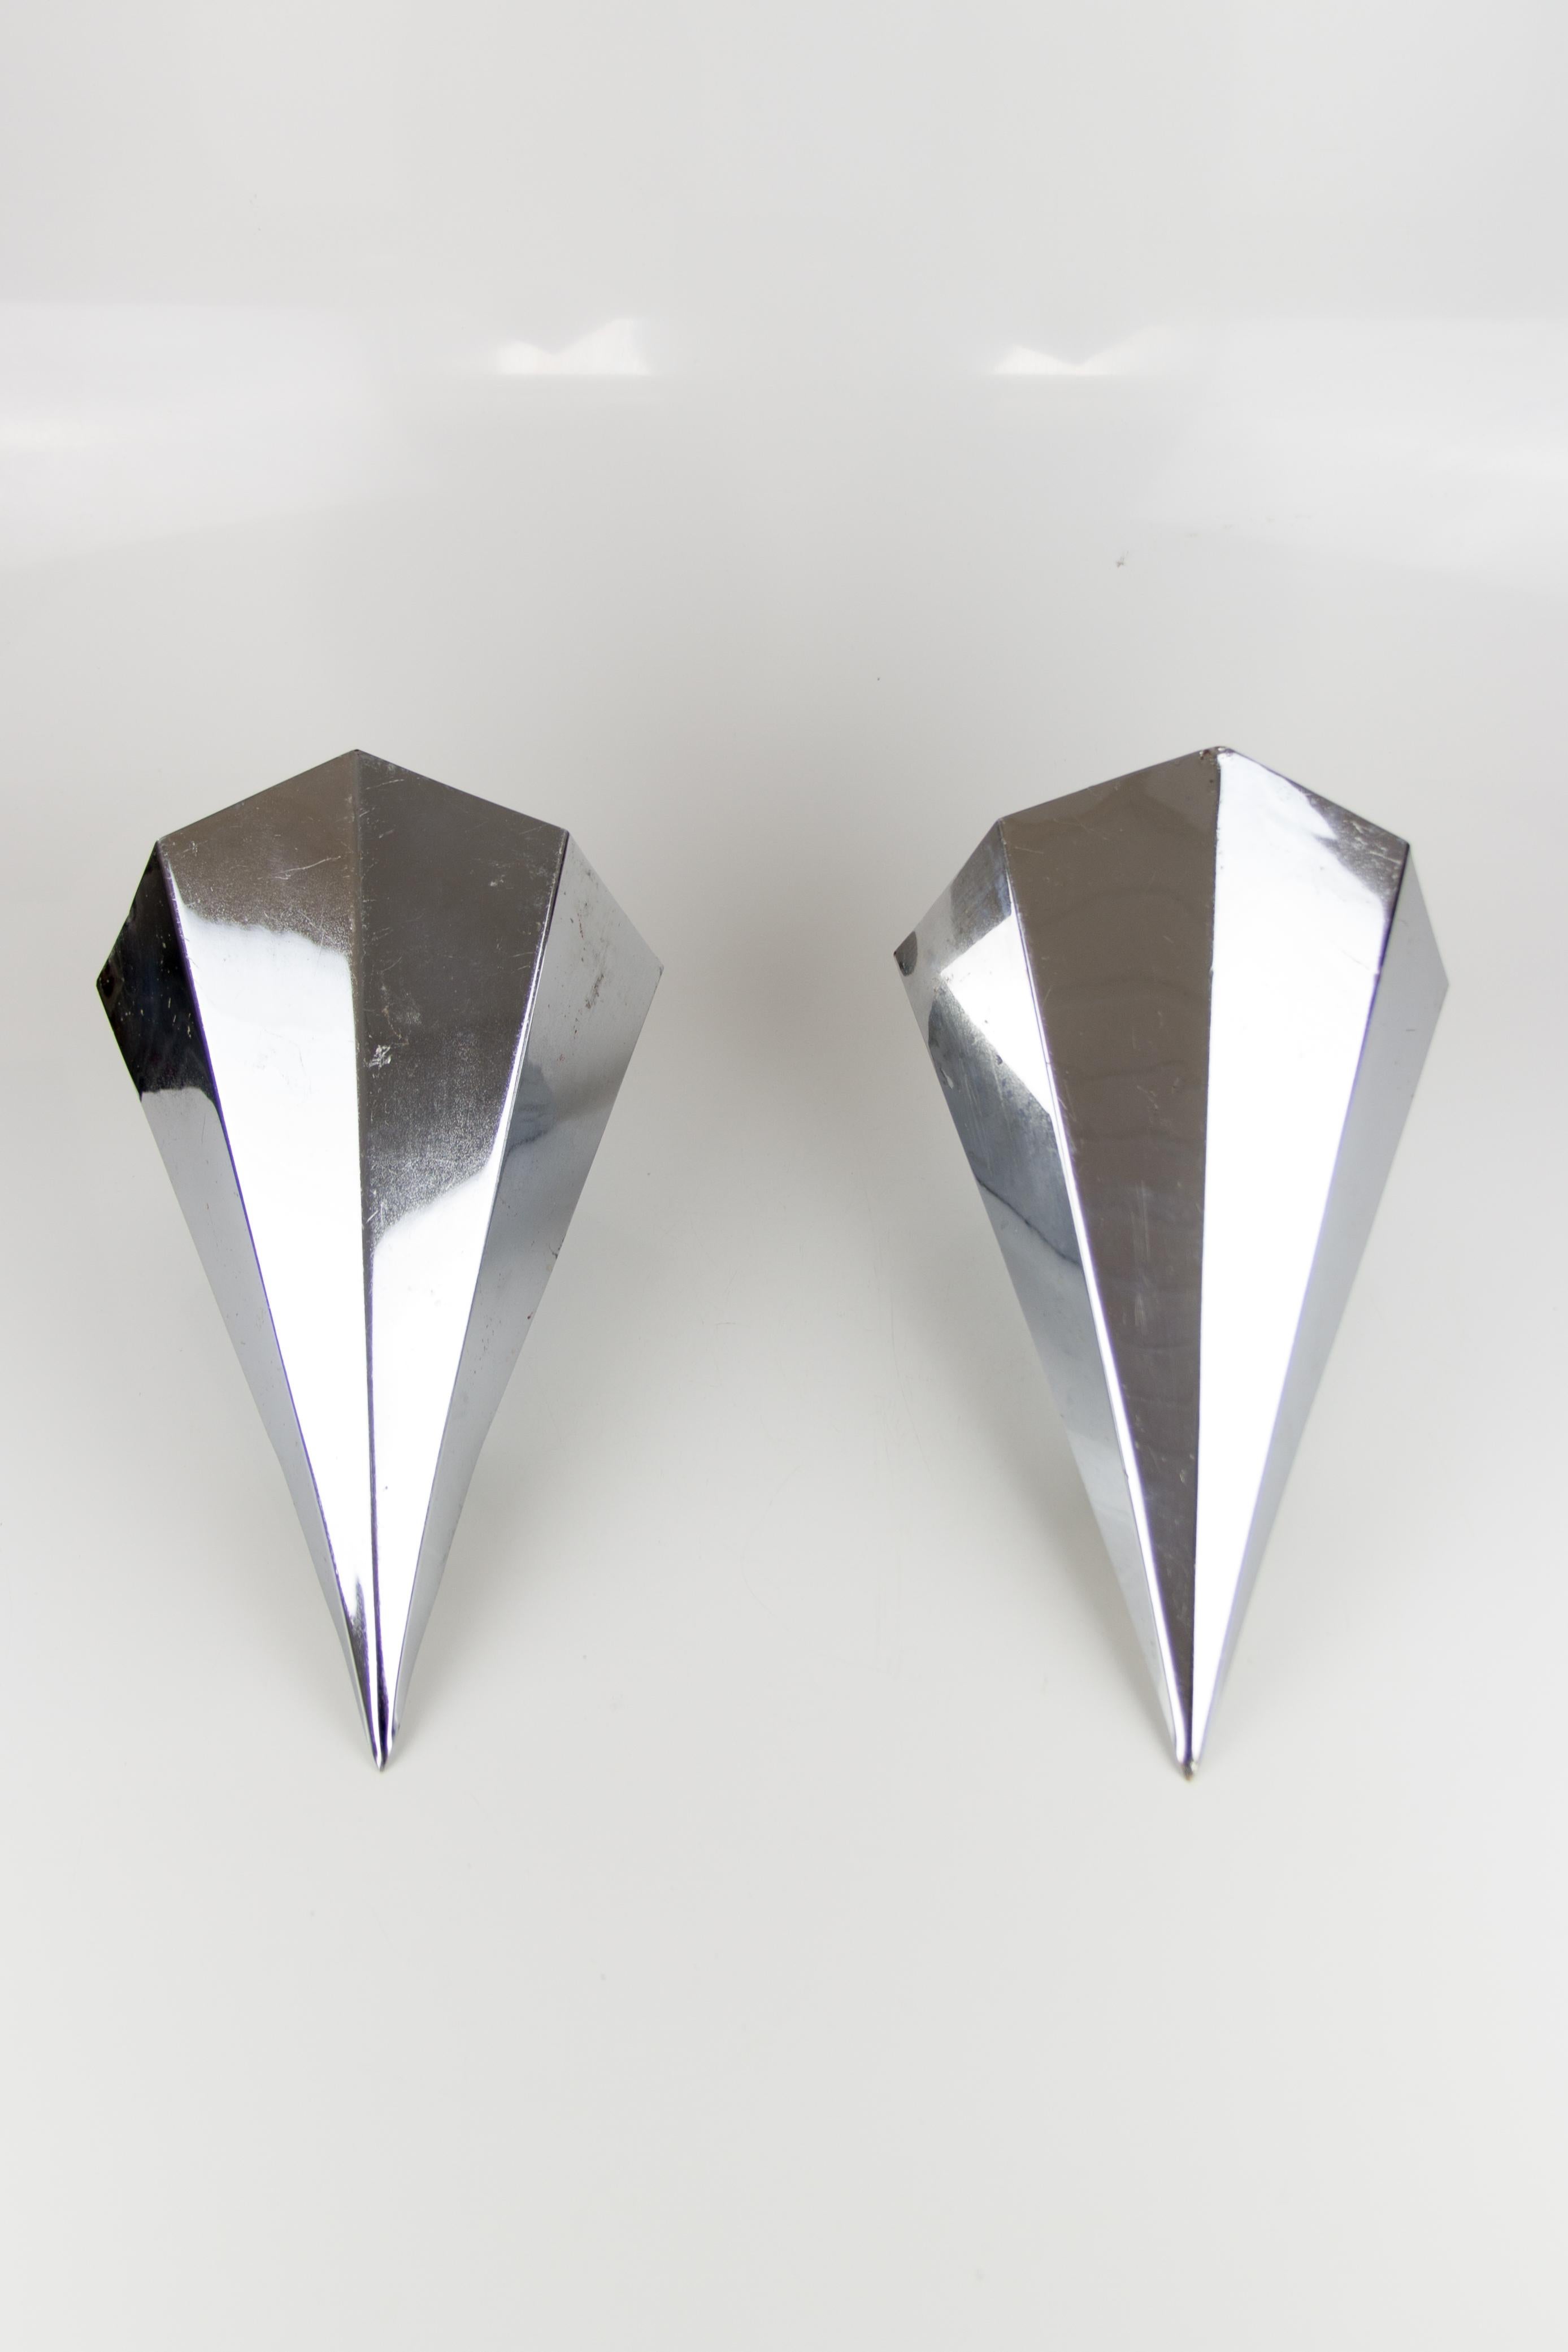 Pair of Art Deco Nickel-Plated Metal Prism Corner Wall Sconces, France, 1920s For Sale 7